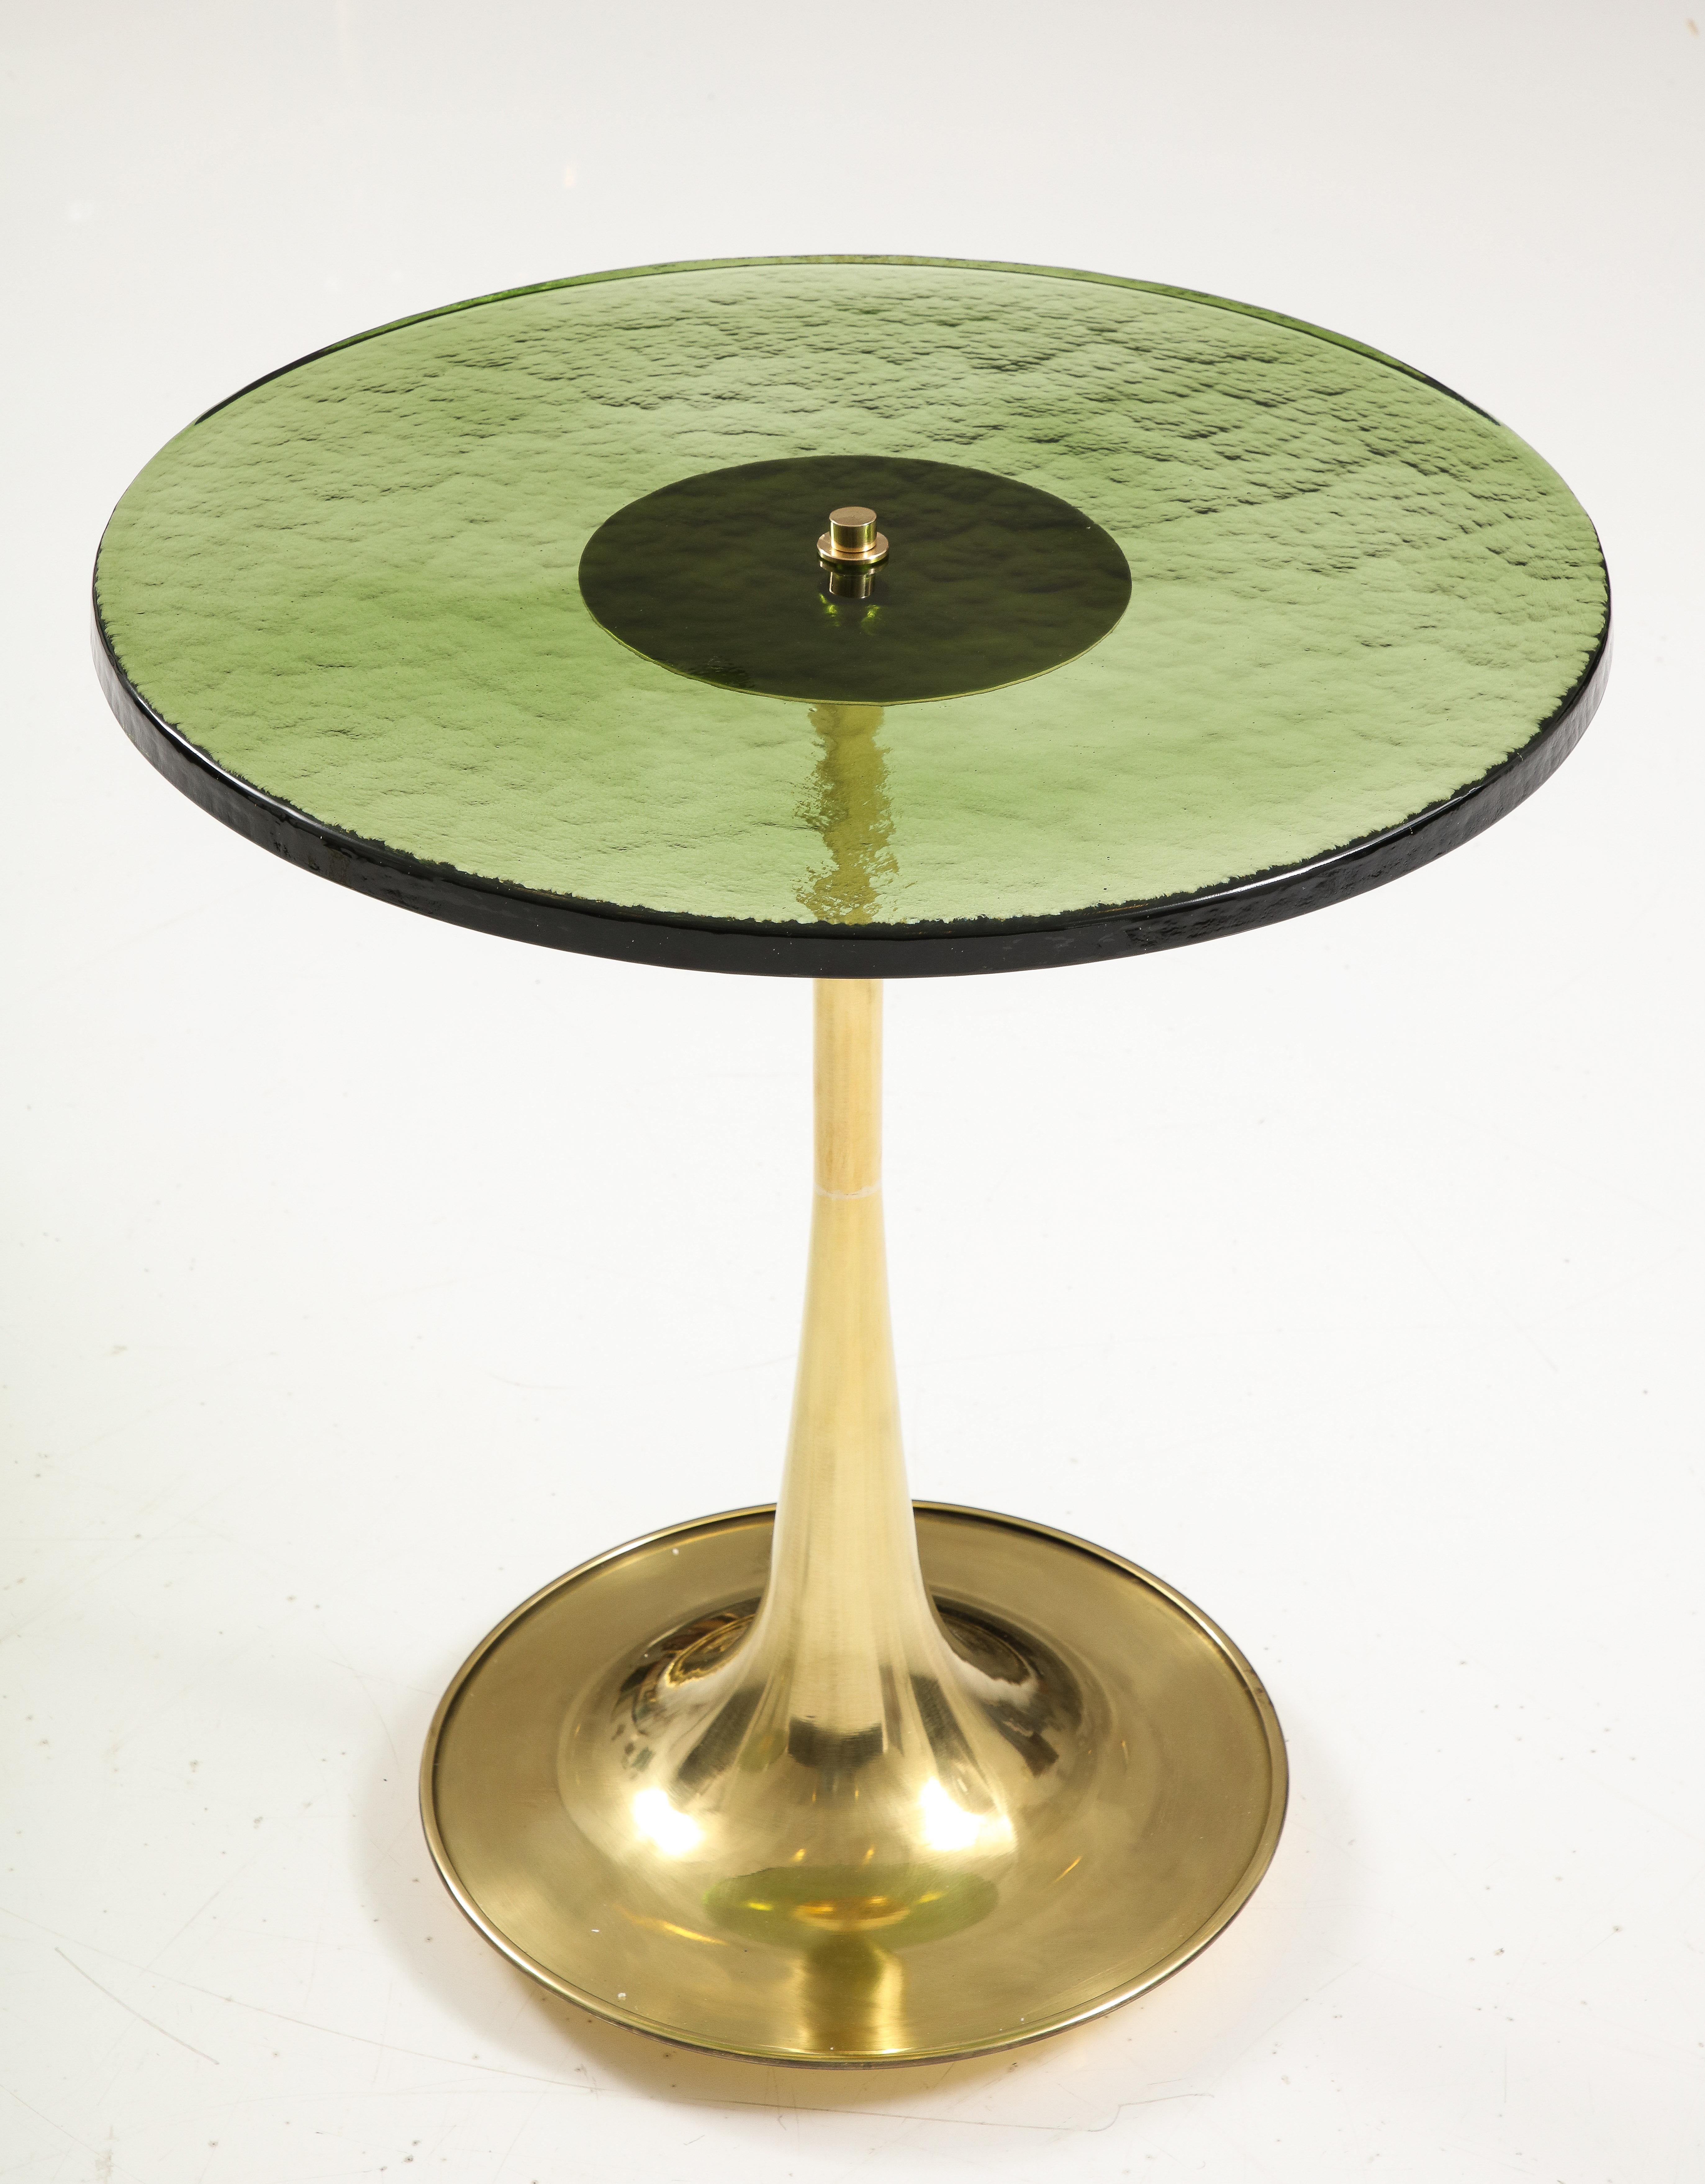 Single Round Green Murano Glass and Brass Martini or Side Table, Italy 1